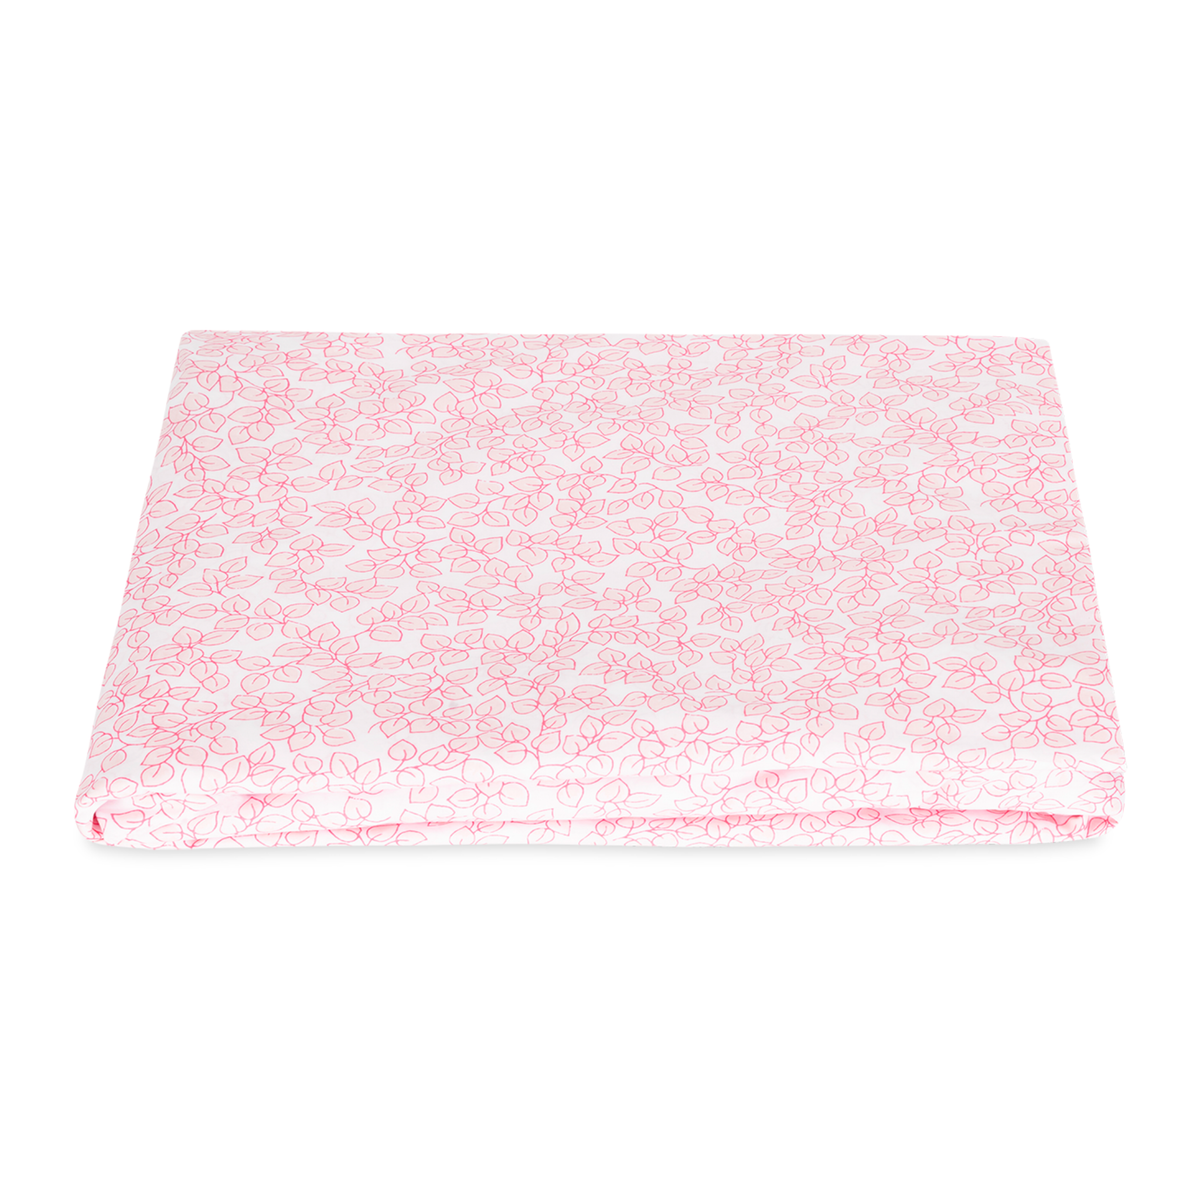 Folded Fitted Sheet of Matouk Margot Bedding in Blush Color